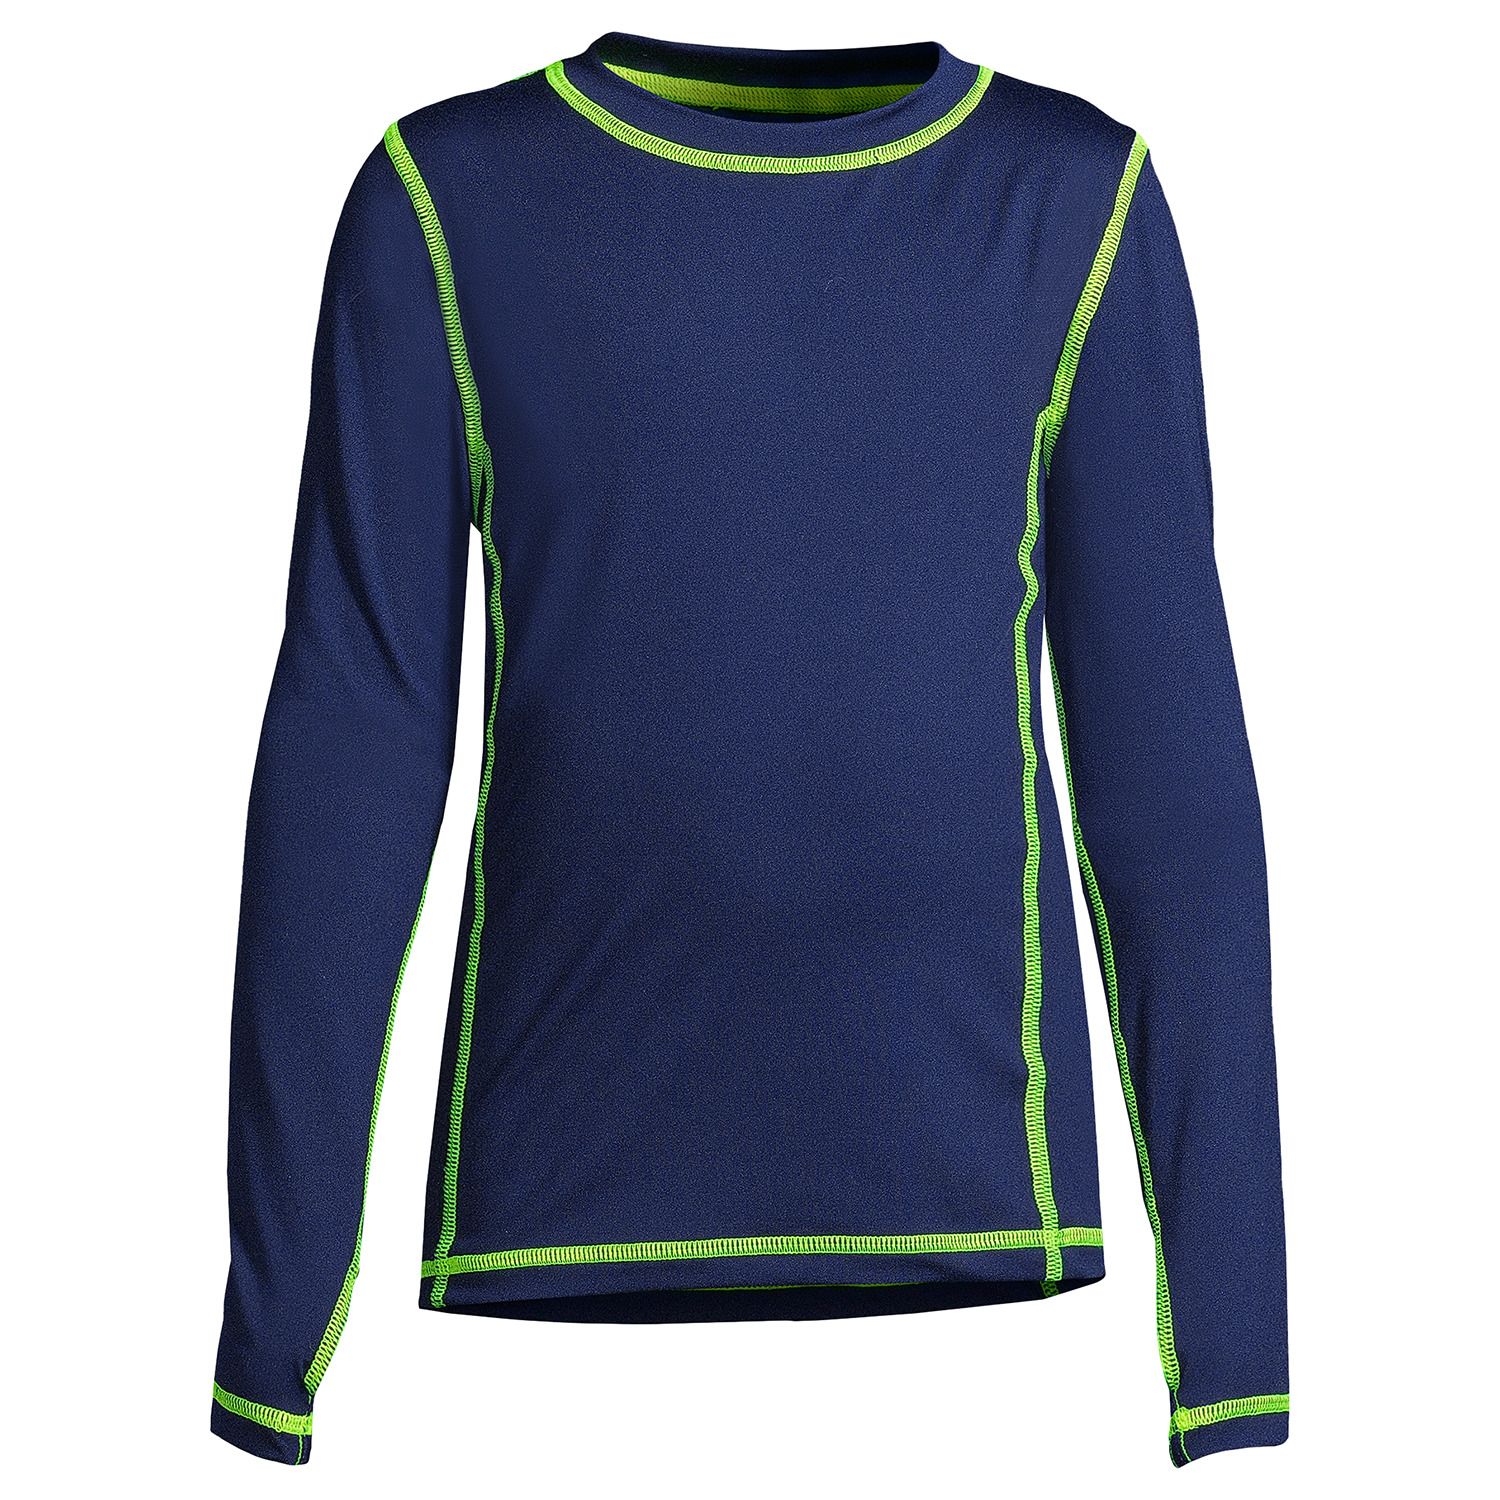 Image for Lands' End Boys 2-20 Thermaskin Thermal Base Layer Long Underwear Shirt at Kohl's.